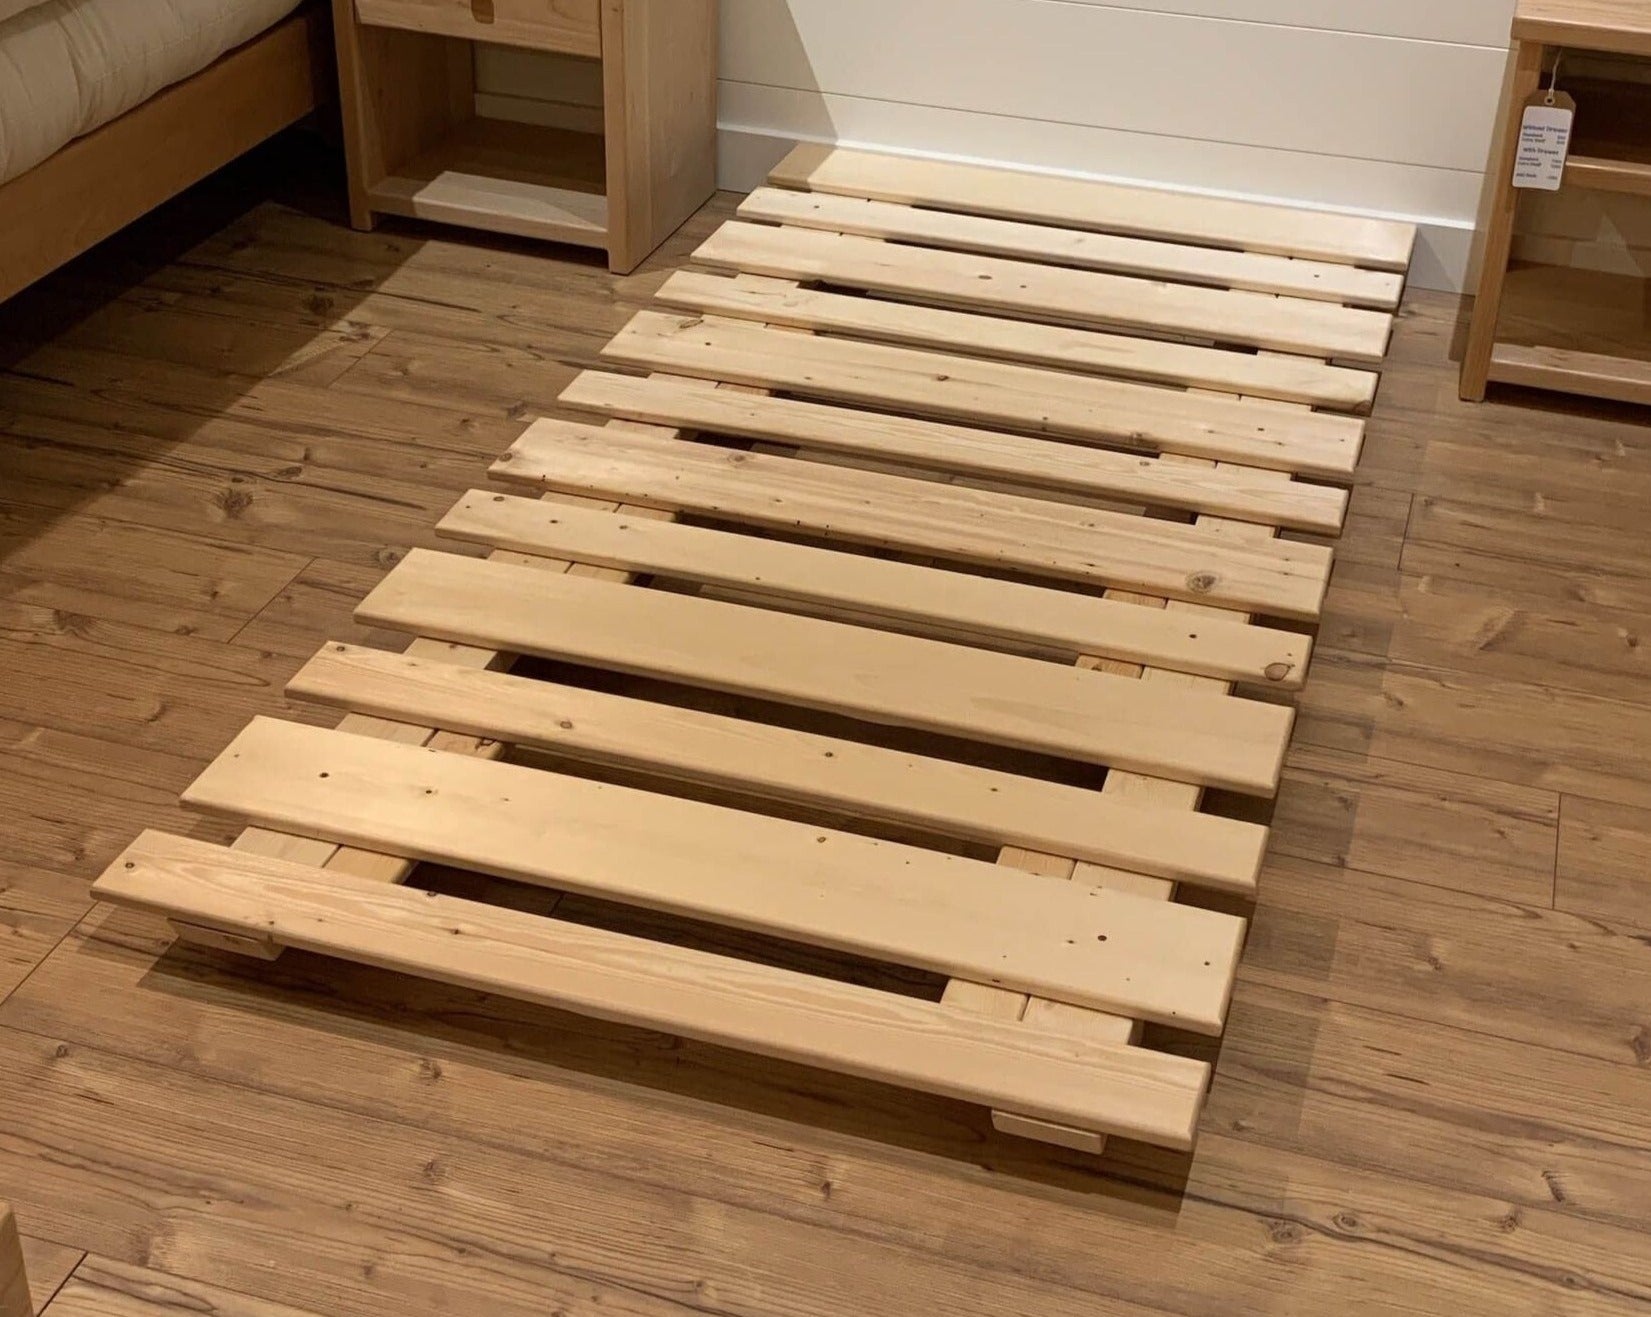 Magic Ultra Low Platform Bed Frame with natural wood slats at a perfect spacing for optimized ventilation